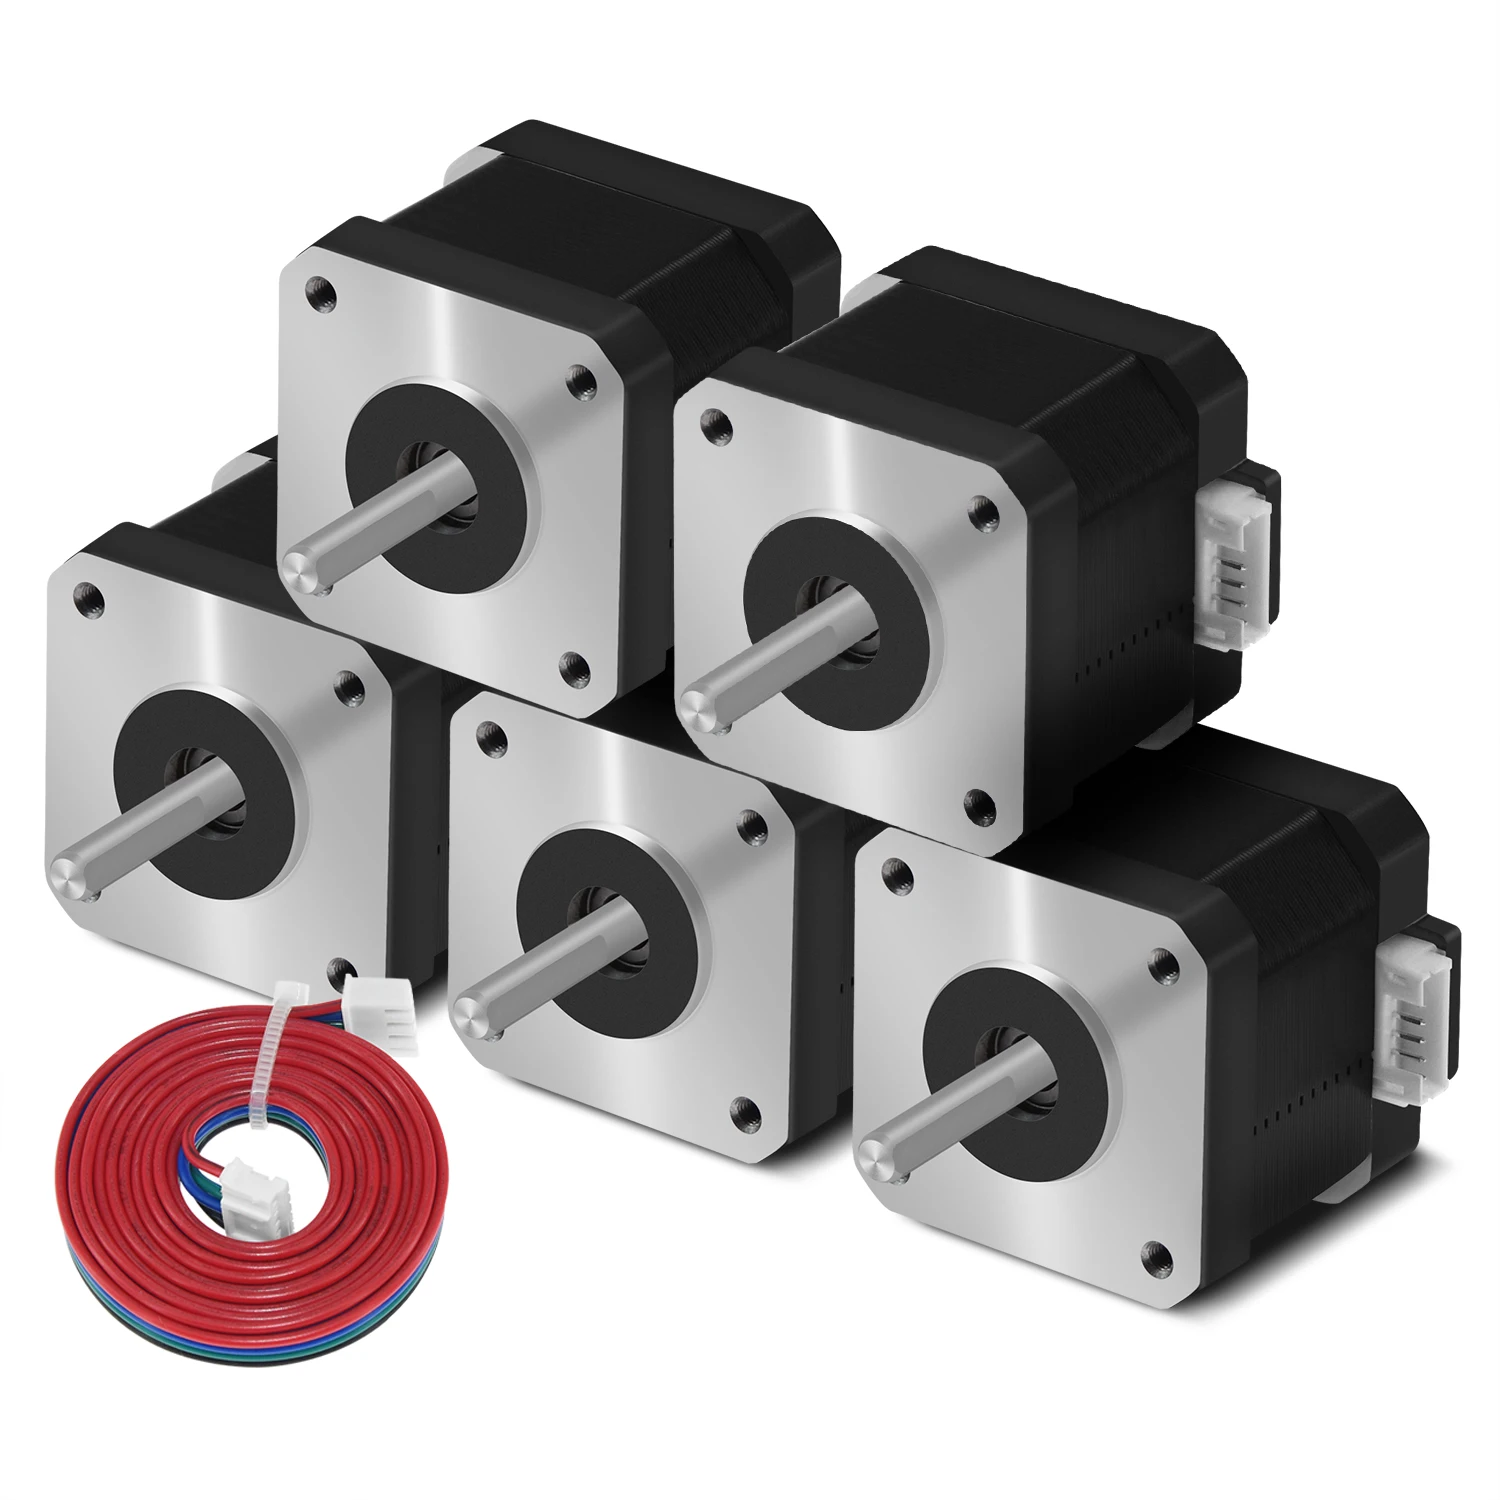 5pcs/lot 1.5A 42 Stepper Motor Nema 17 4-Lead 42BYGH Motor 17HS4401S Stepper Motor with 4 Pin Dupont Cable 3D Printer Parts